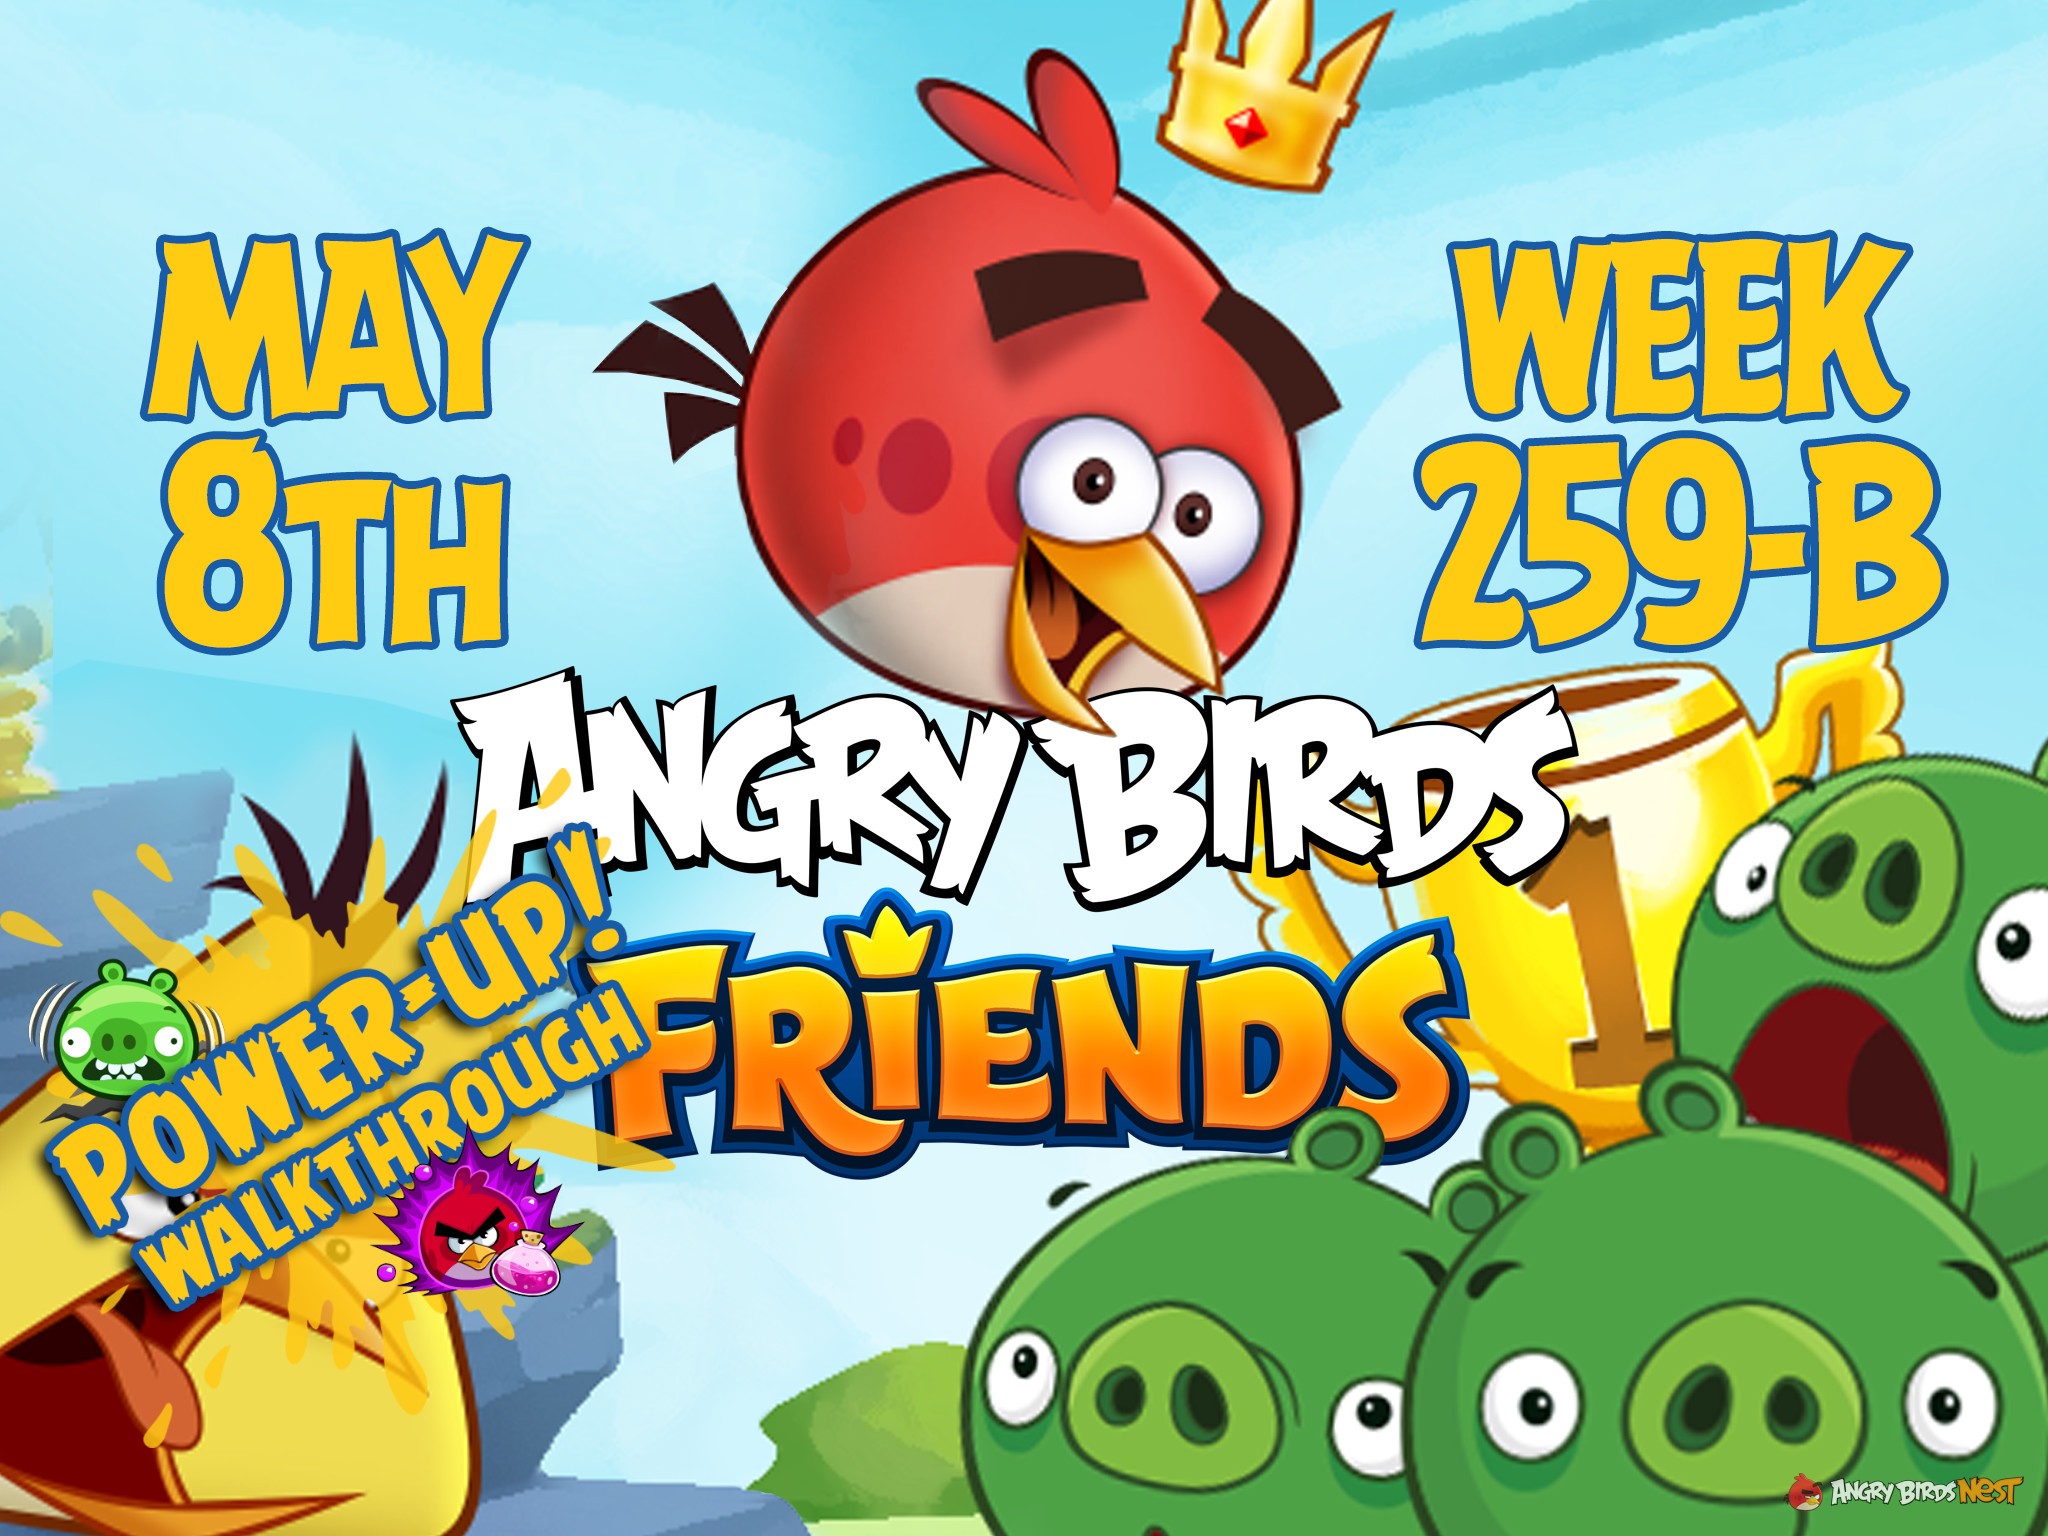 Angry Birds Friends Tournament Week 259-B Feature Image PU